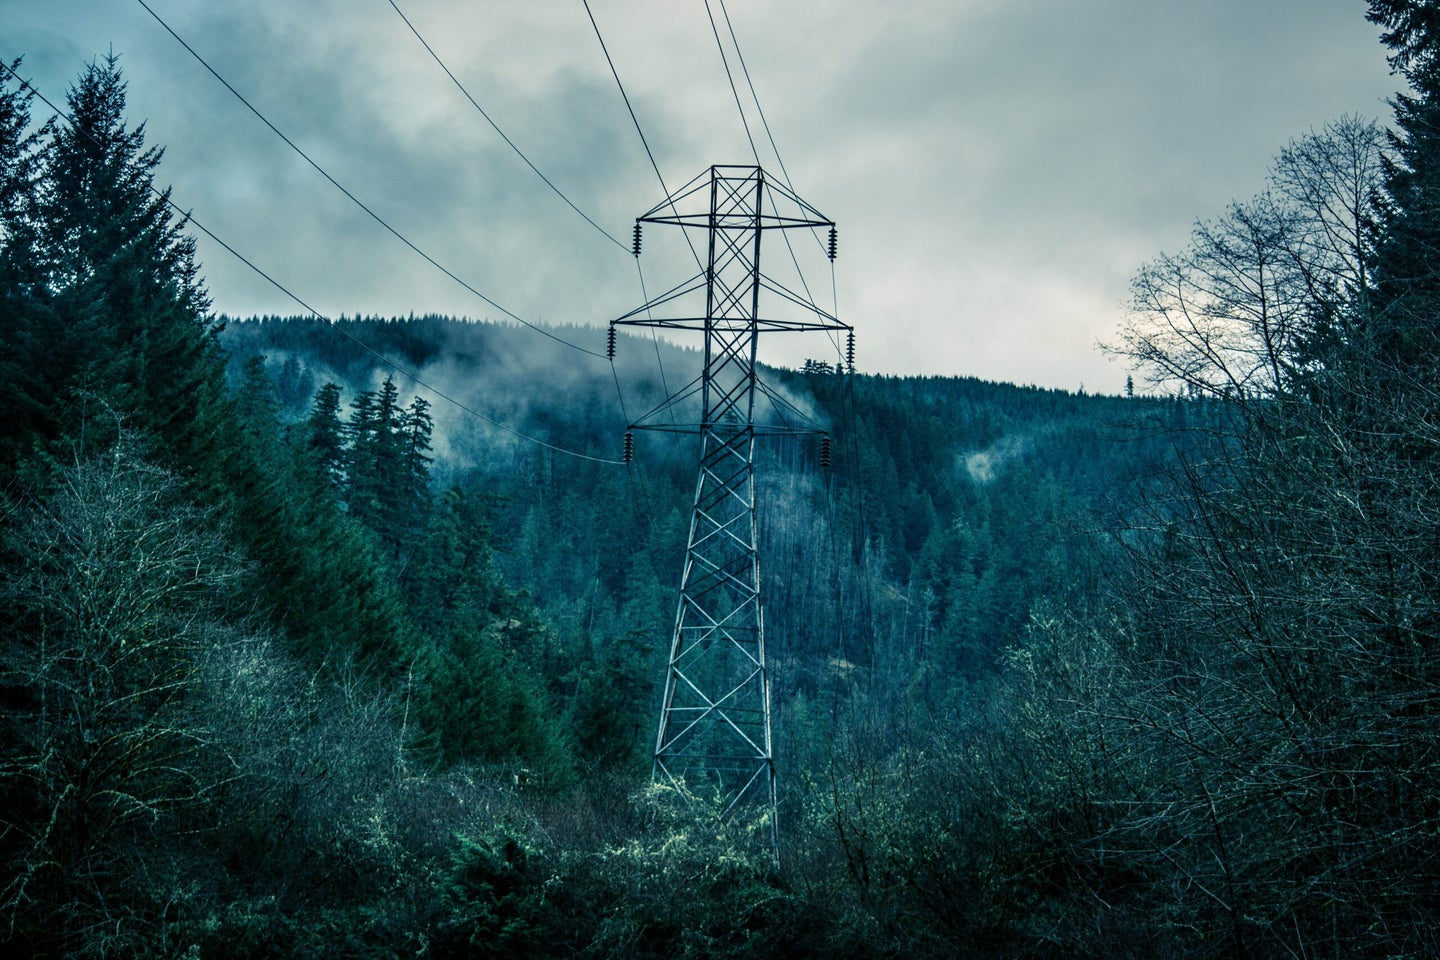 Electricity lines over a deep, gloomy forest with gas rising.